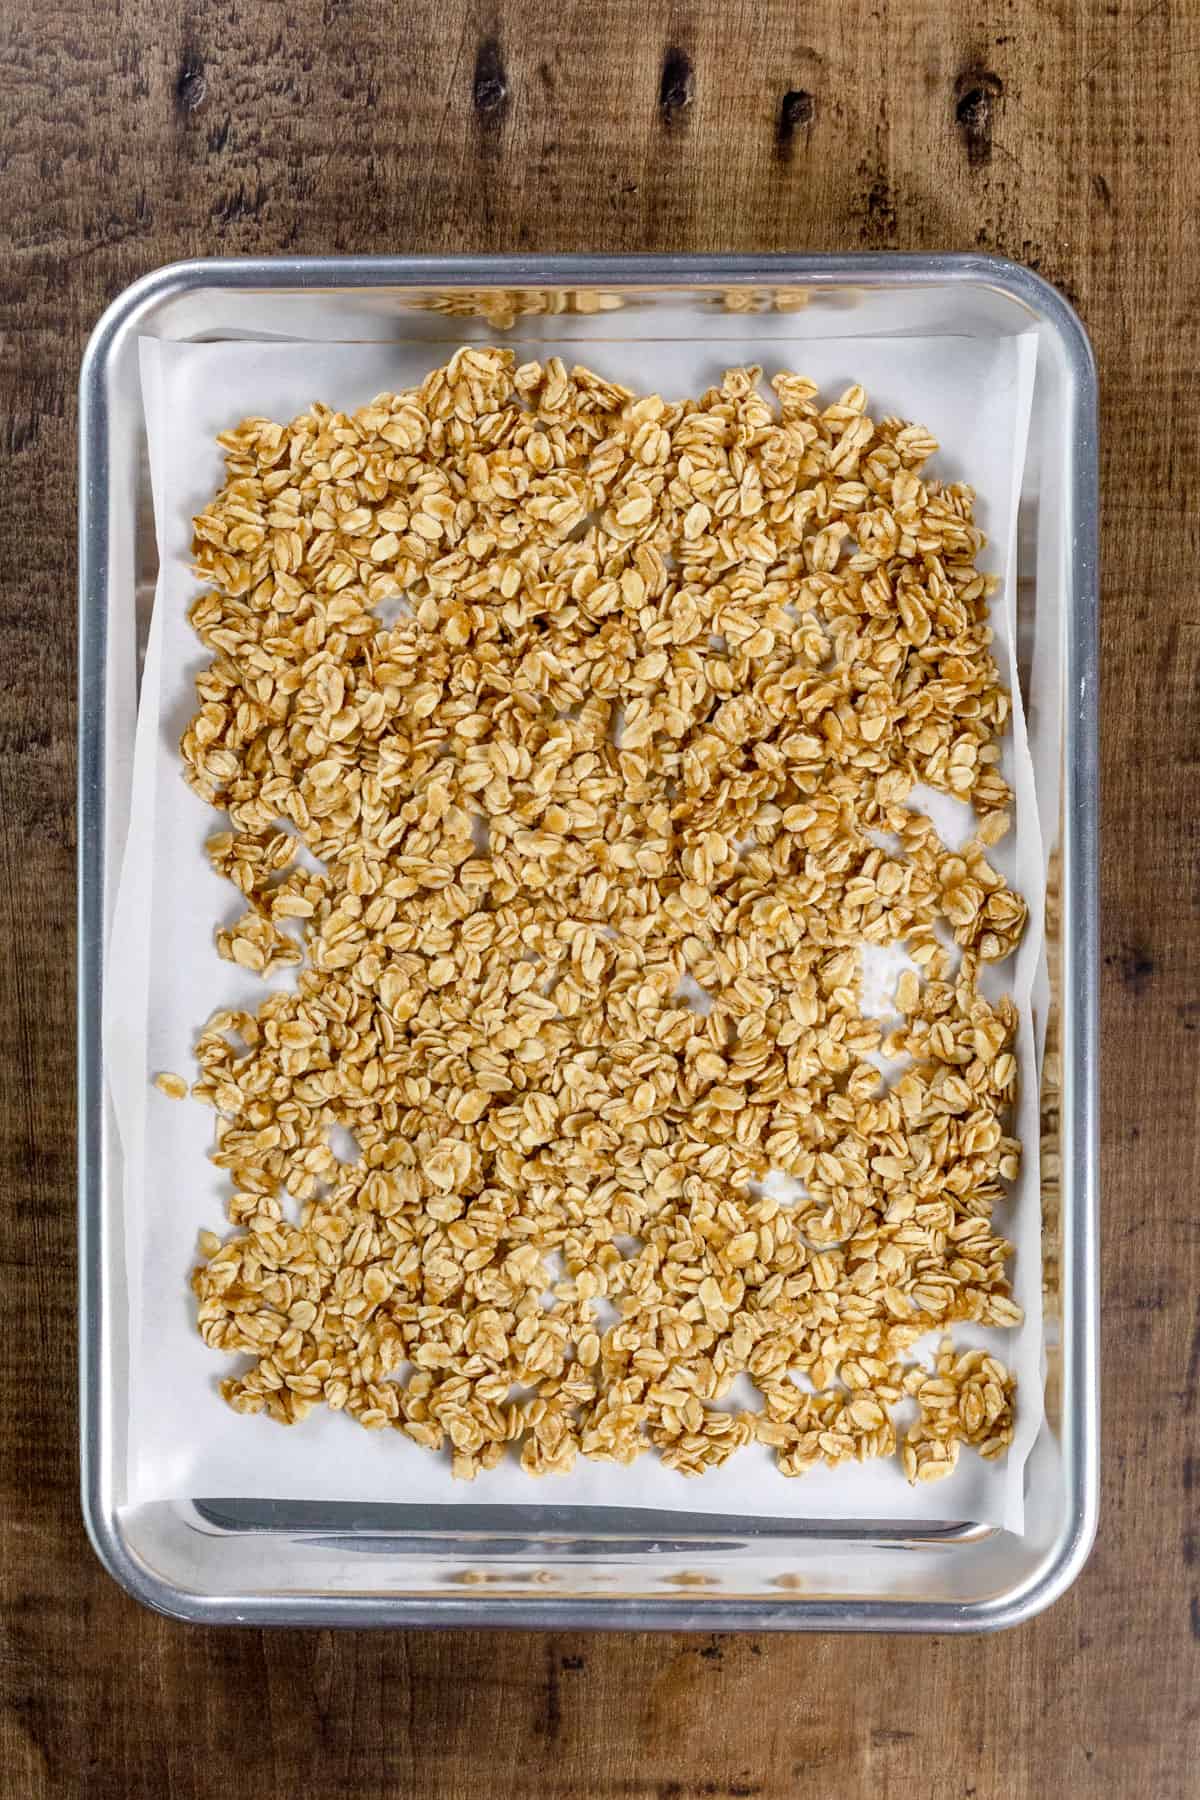 Baking sheet covered in cooked granola on a white parchment paper on a wood kitchen table.